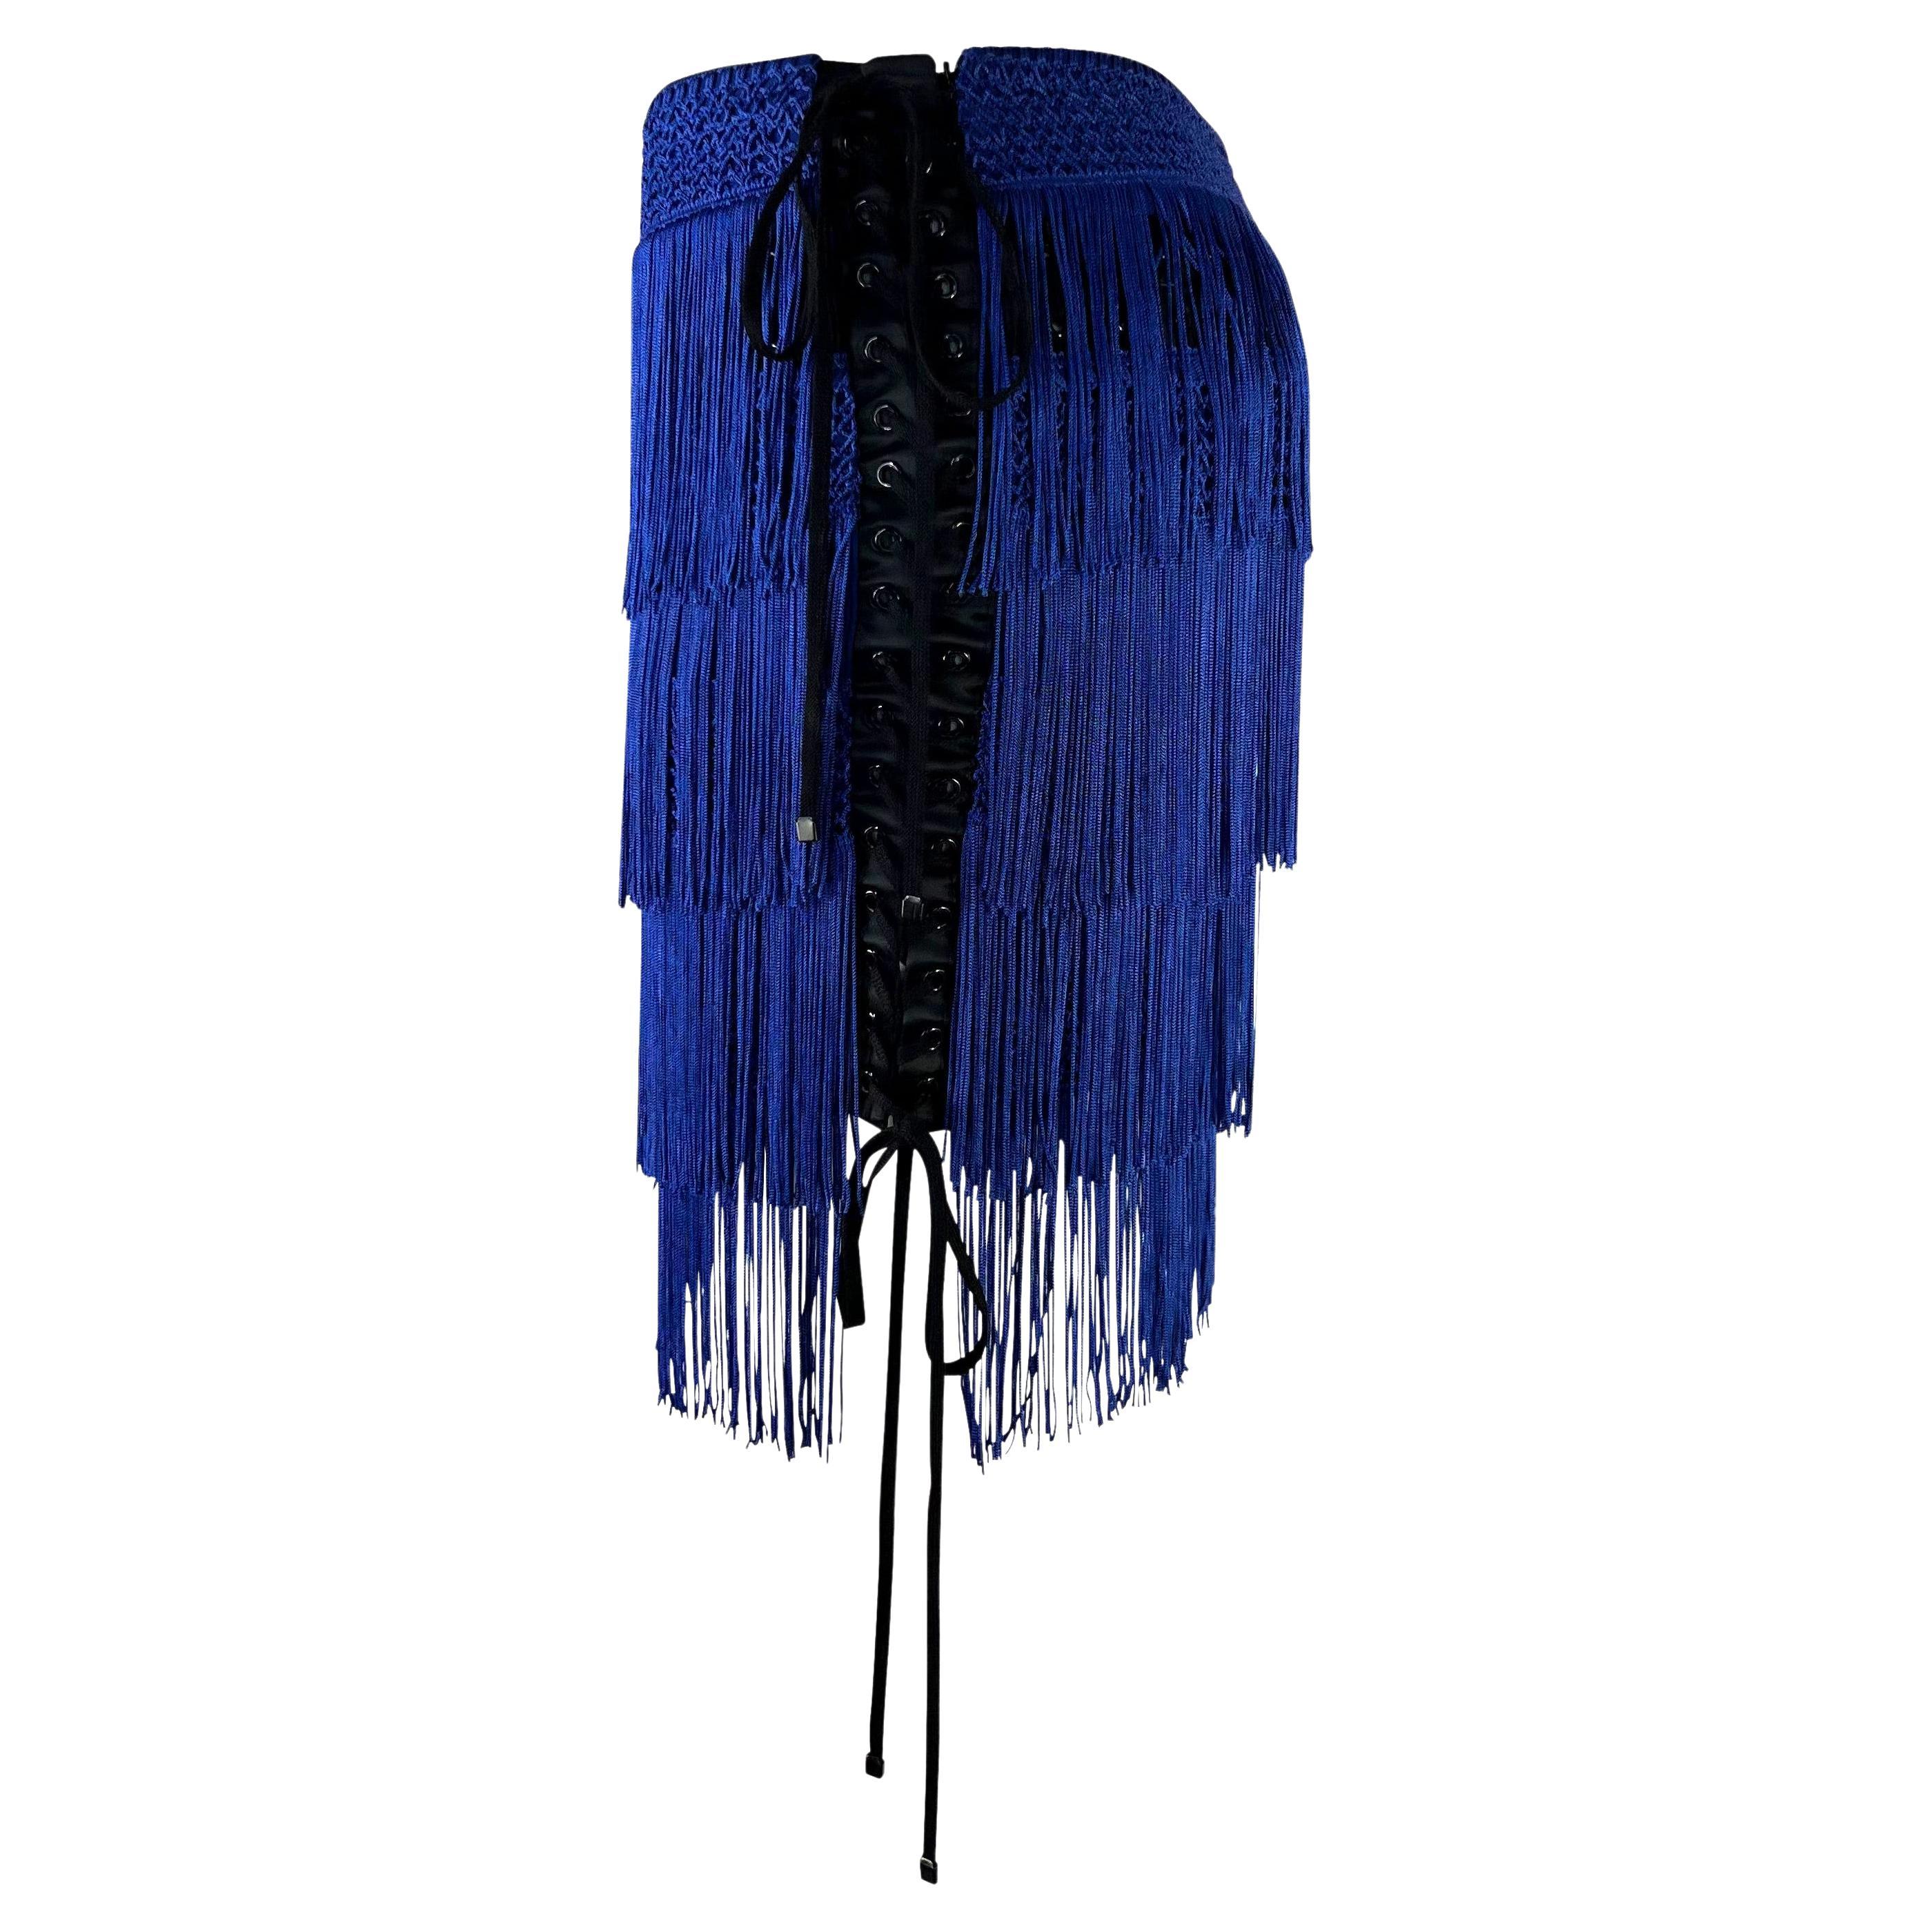 Presenting an electric blue fringe Dolce and Gabbana mini skirt. From the Fall/Winter 2003 collection, this vibrant skirt features layers of fringe with lace-up corset-style detailing. Similarly constructed pieces were presented on the season's